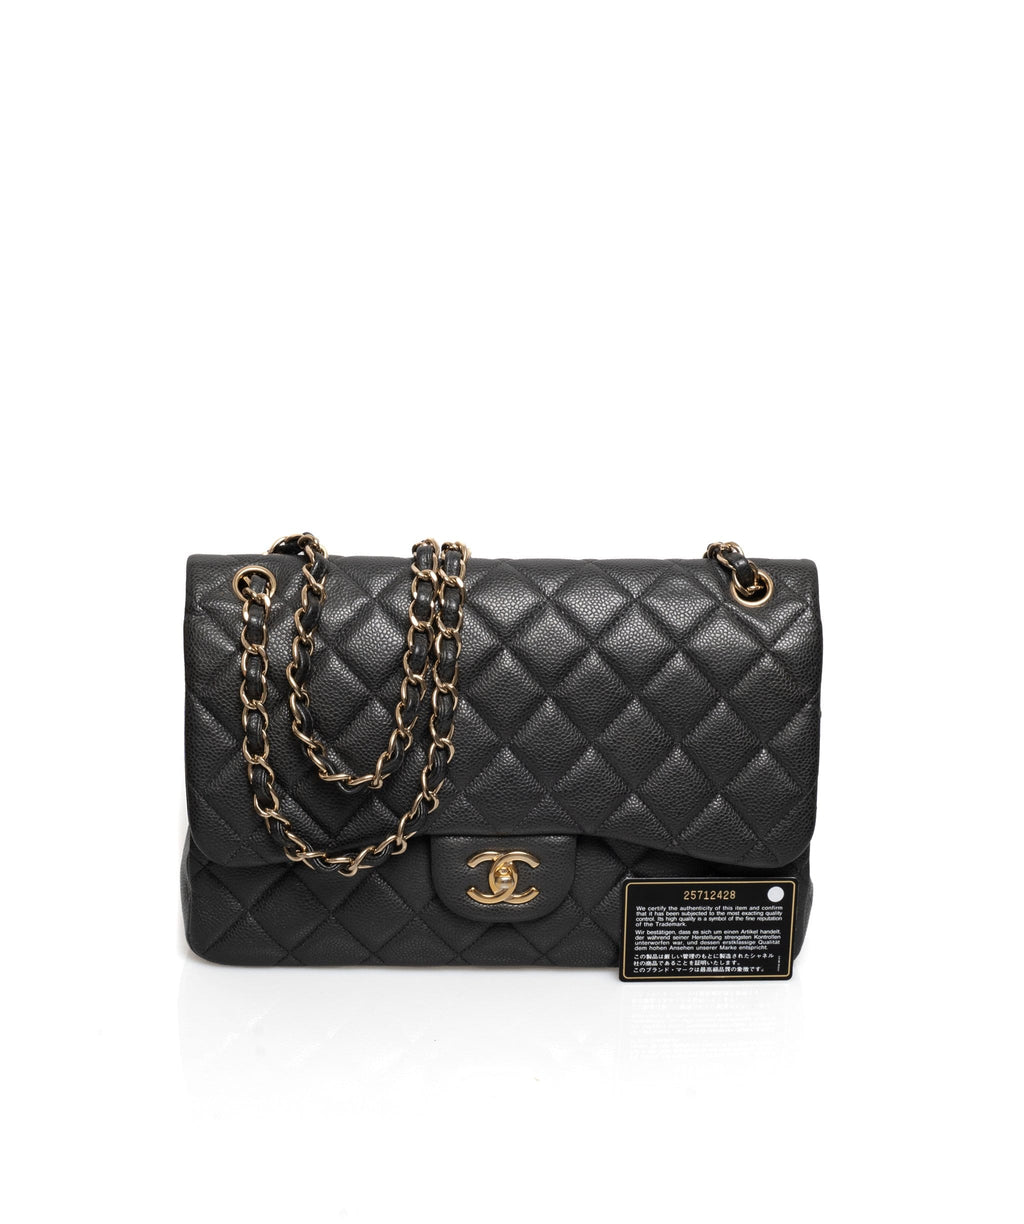 Chanel Black Quilted Leather Large Classic Shopping Tote Bag